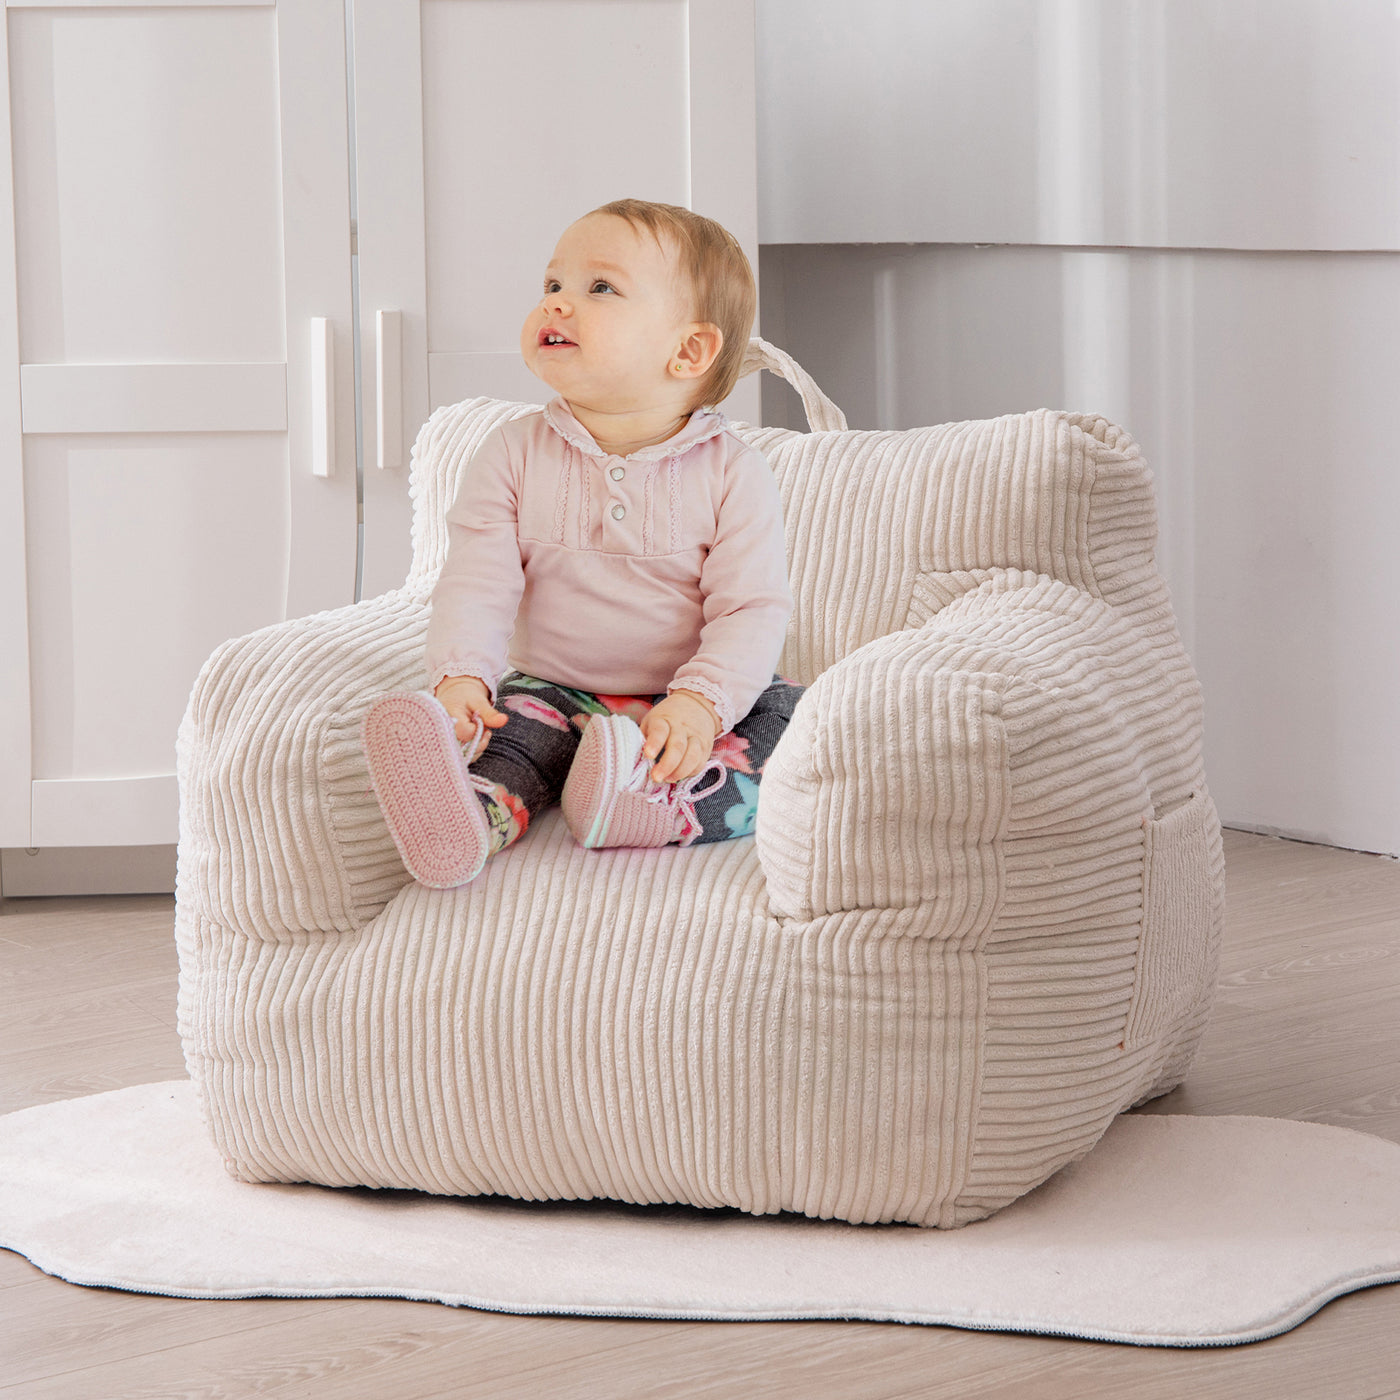 MAXYOYO Kids Bean Bag Chair, Corduroy Bean Bag Couch with Armrests for Children's Room (White)